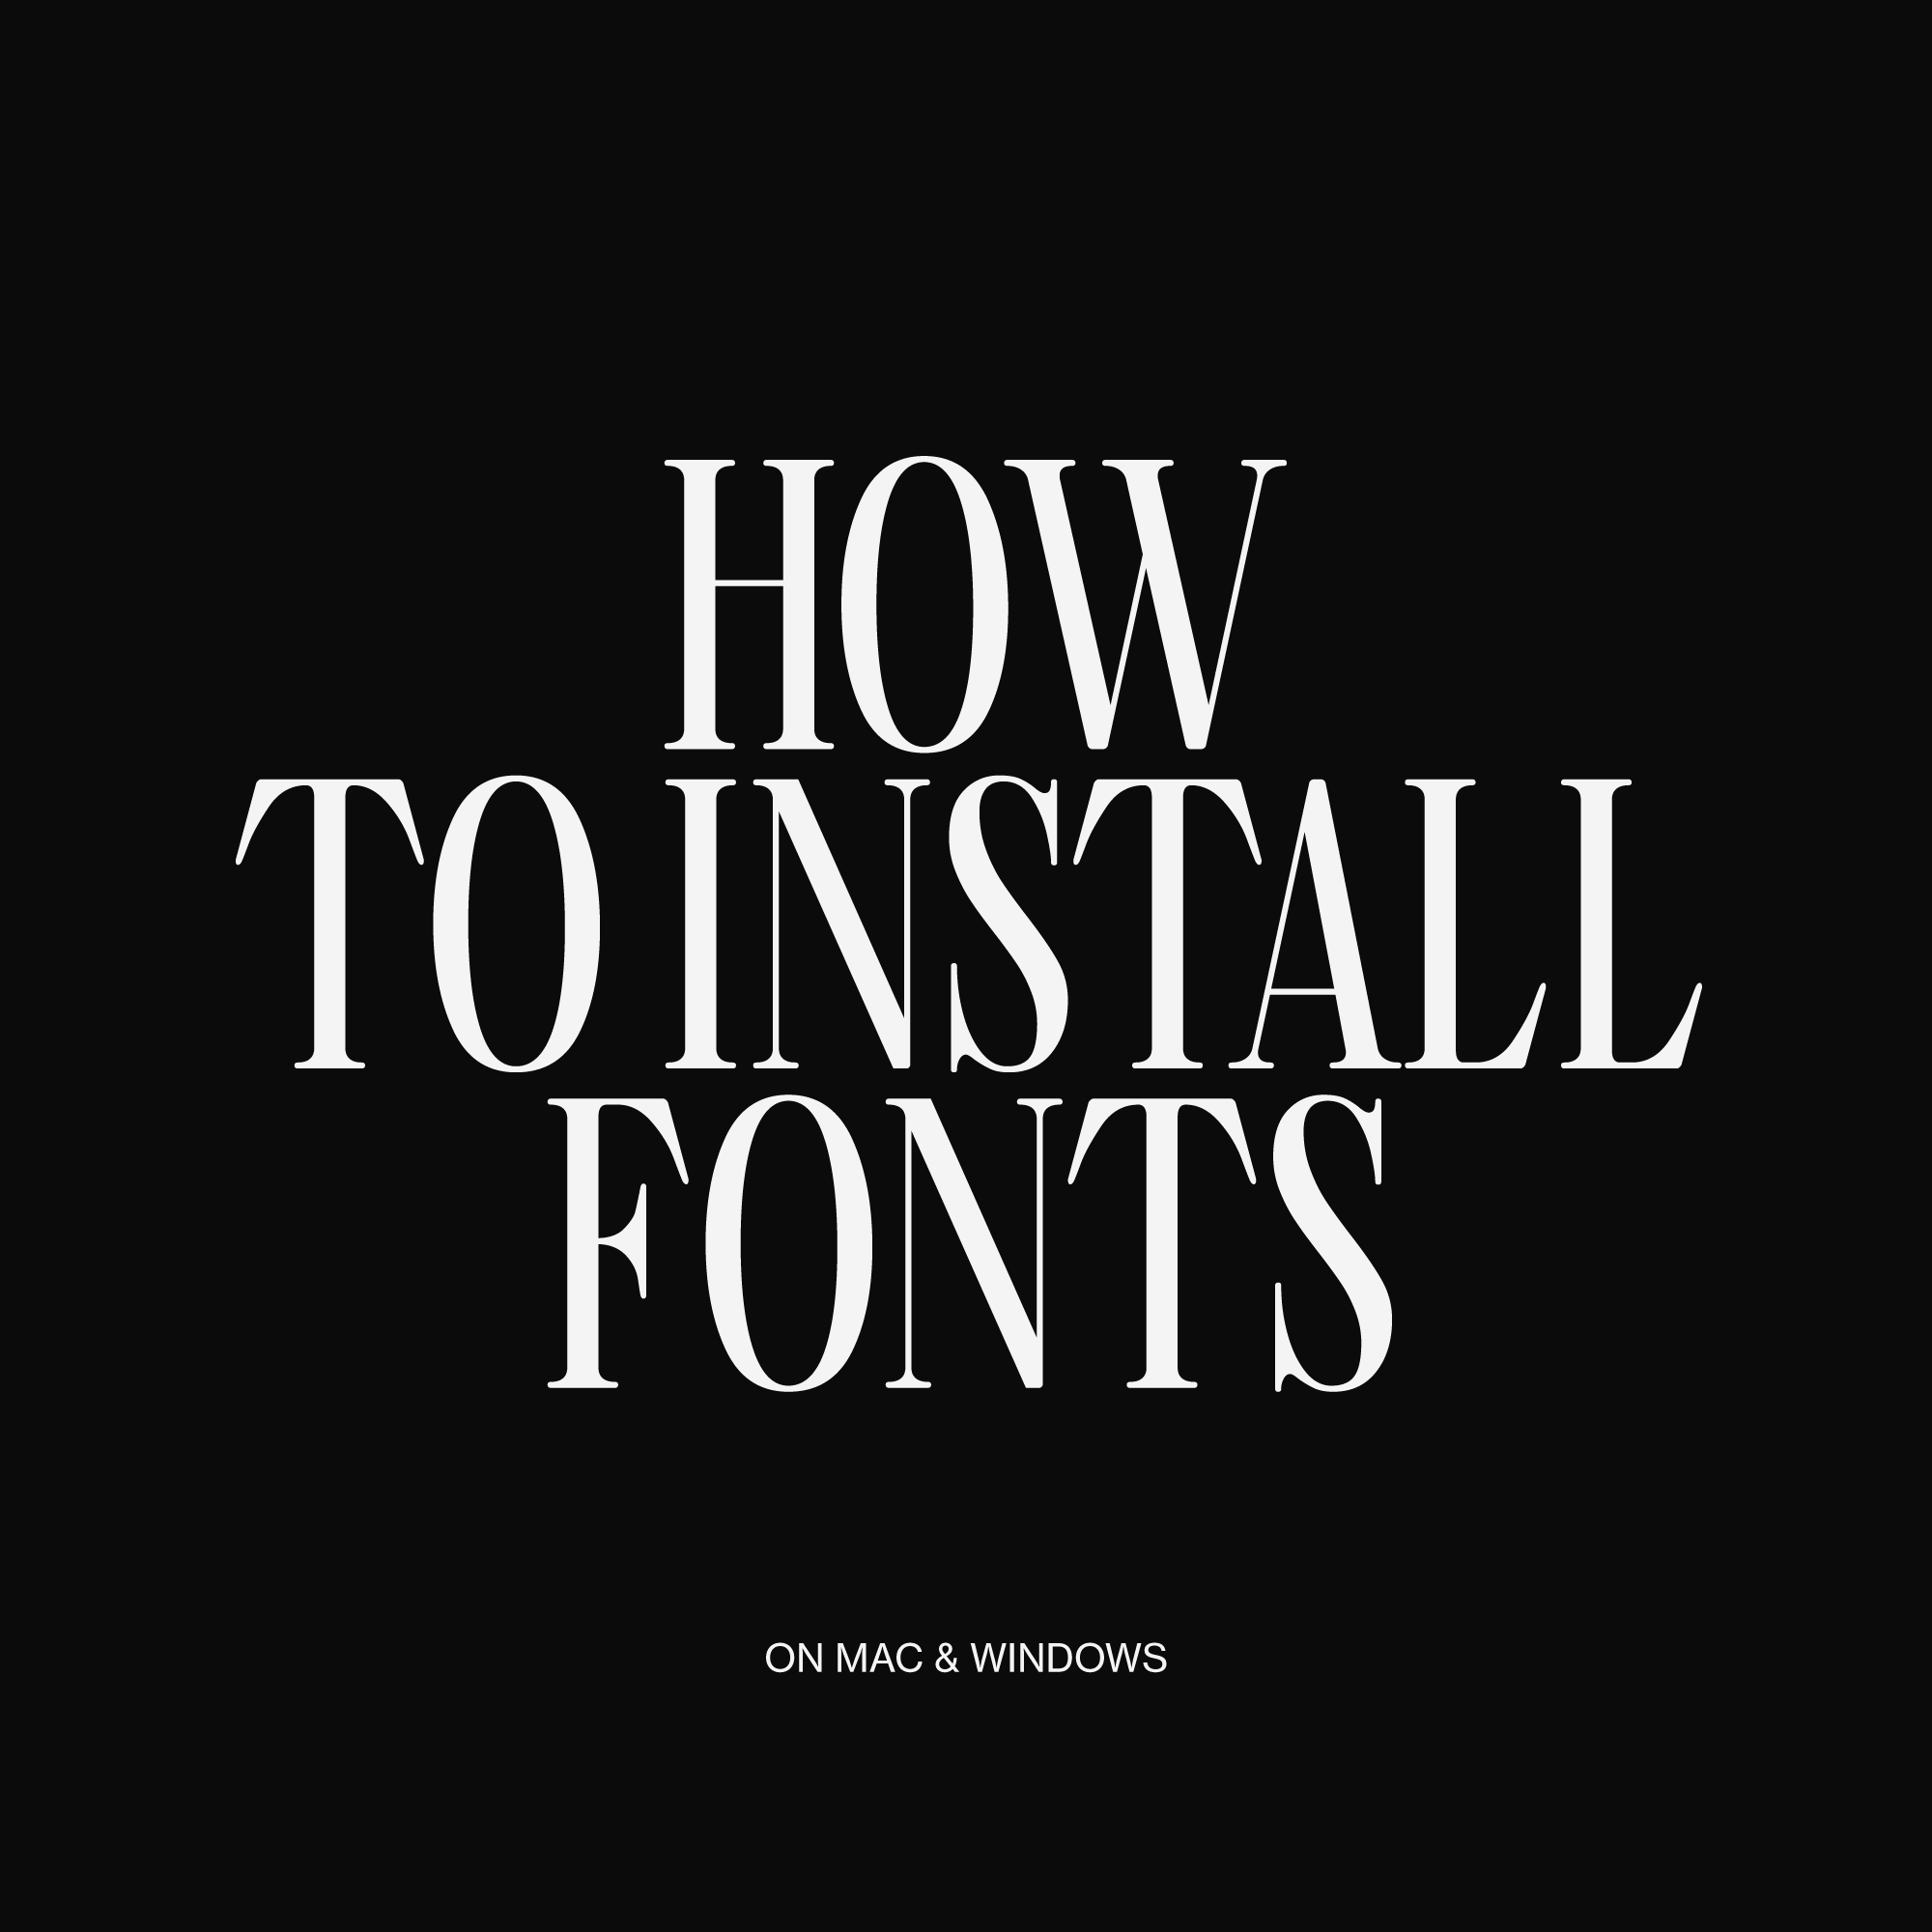 How To Install Fonts on Mac and Windows - A full guide by Sweetest Goods with Tips